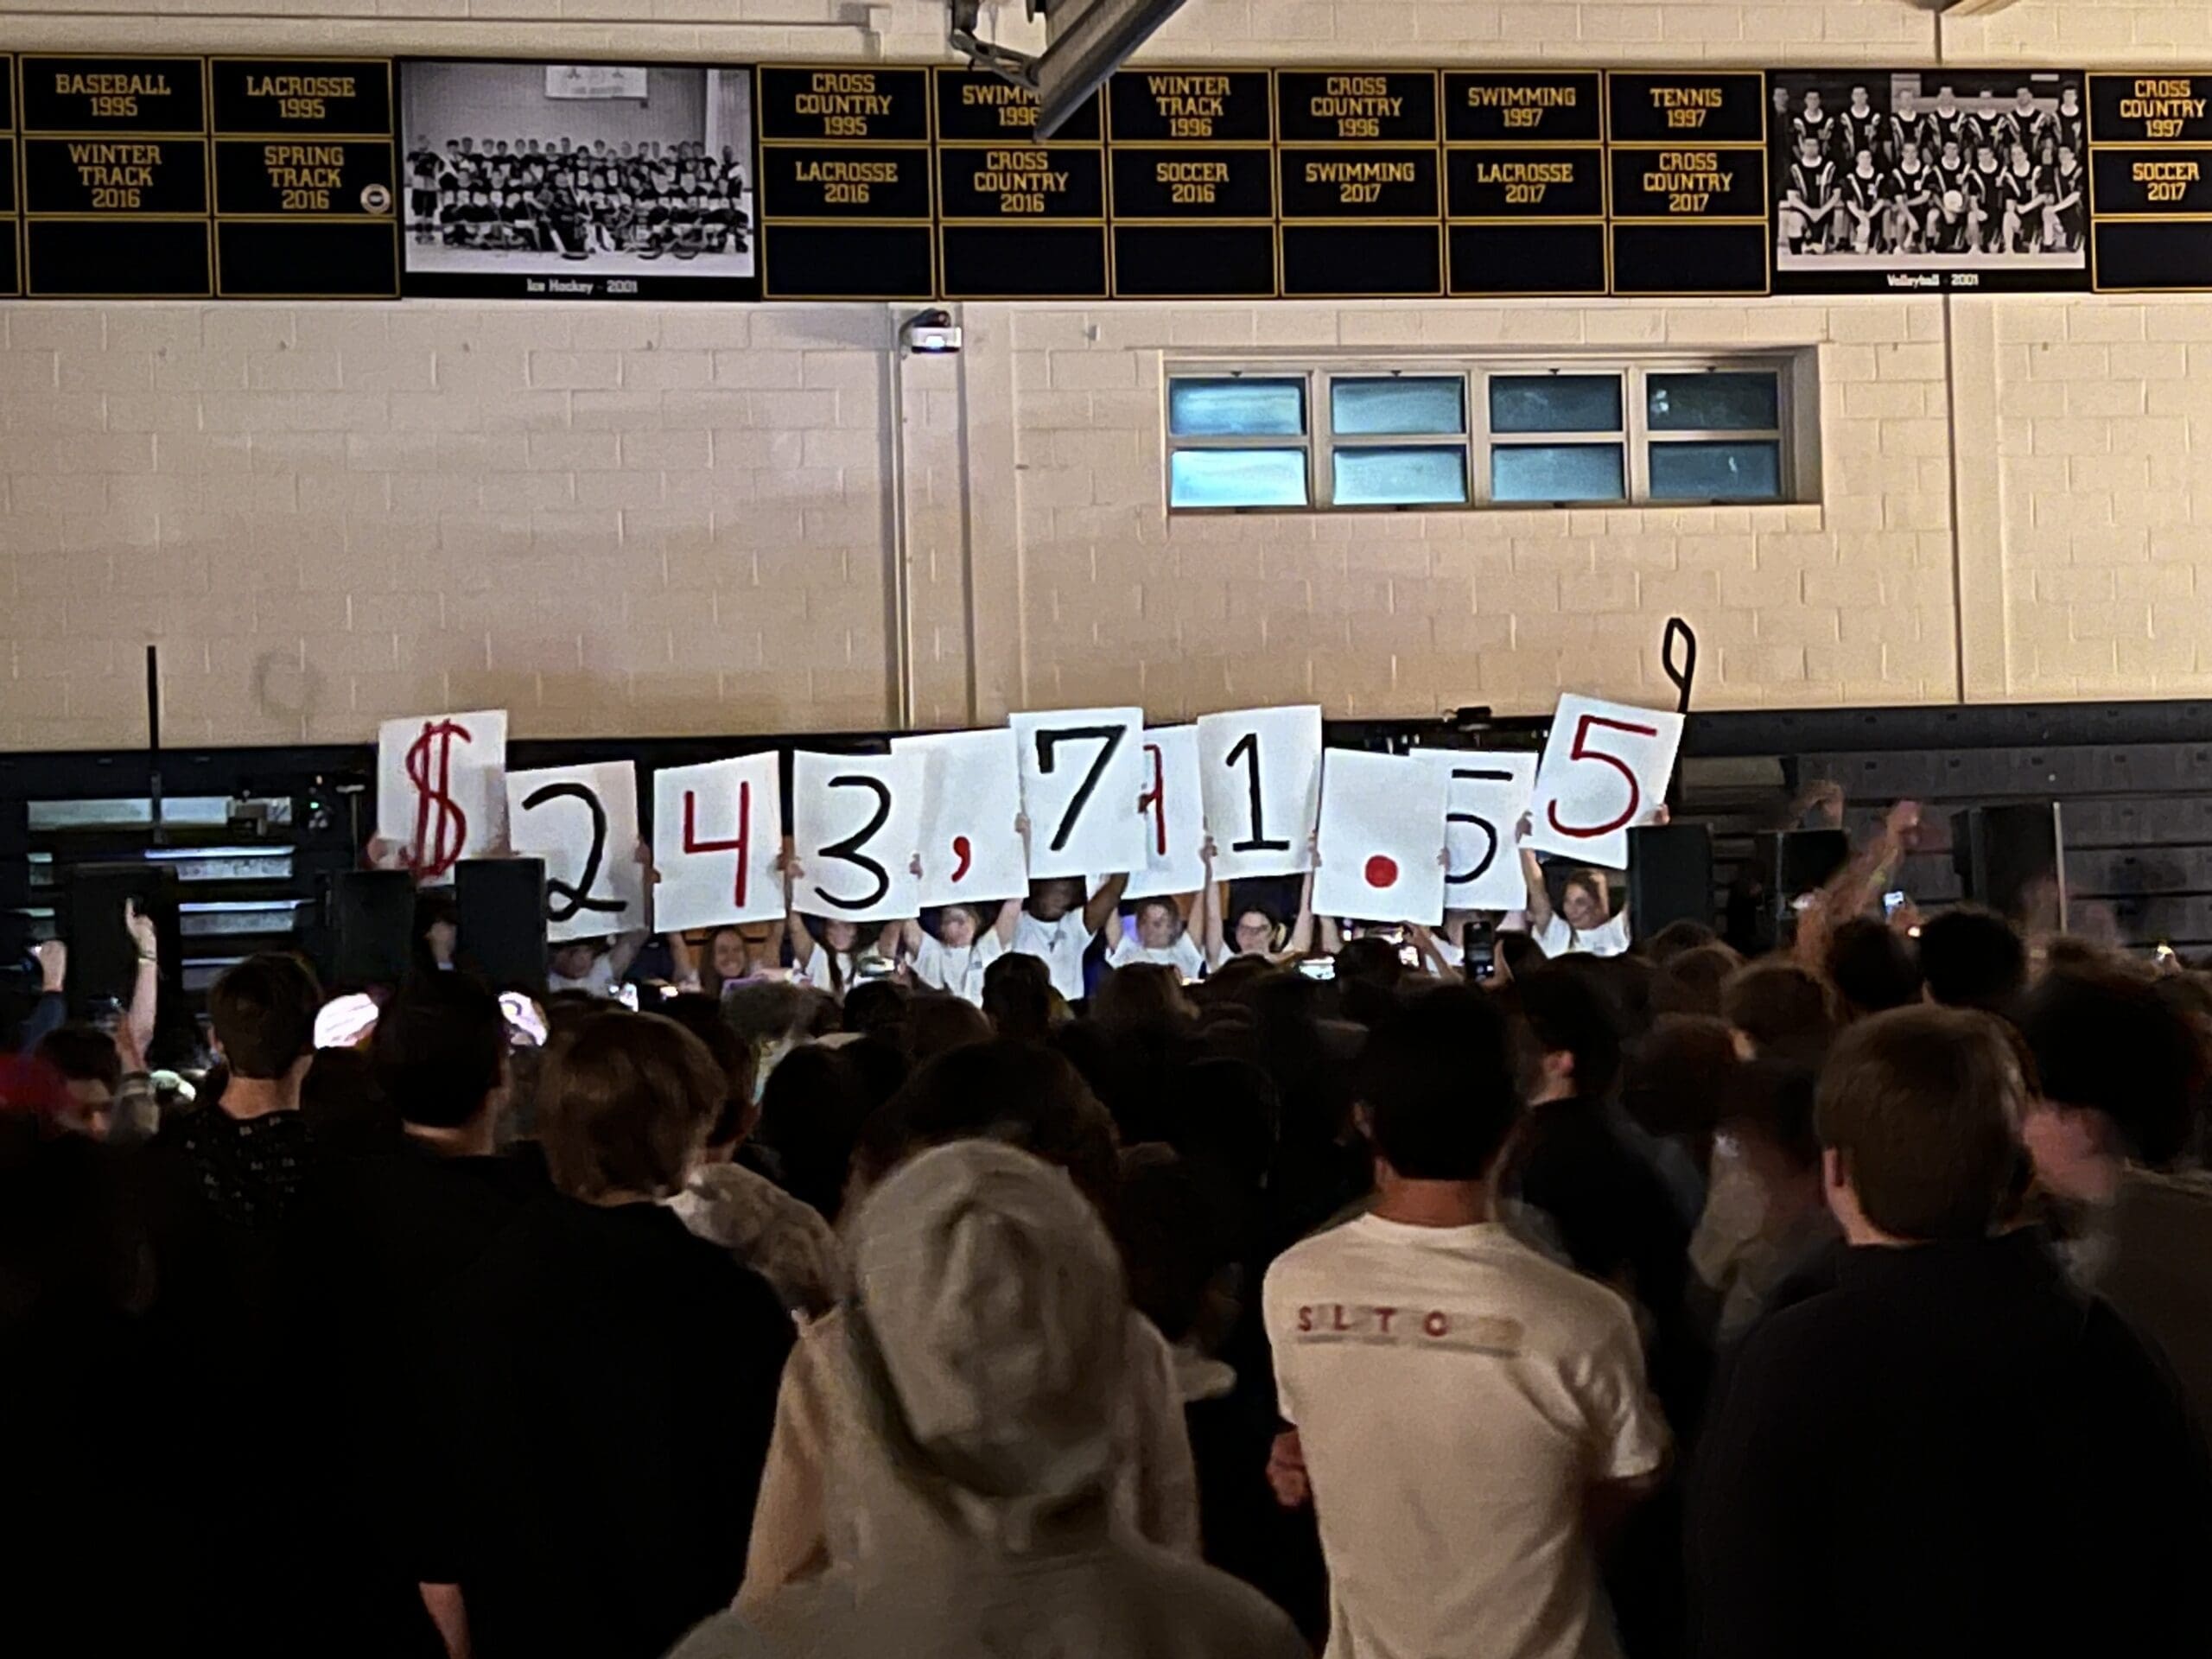 The final fundraising tally for this year's SALSTHON.